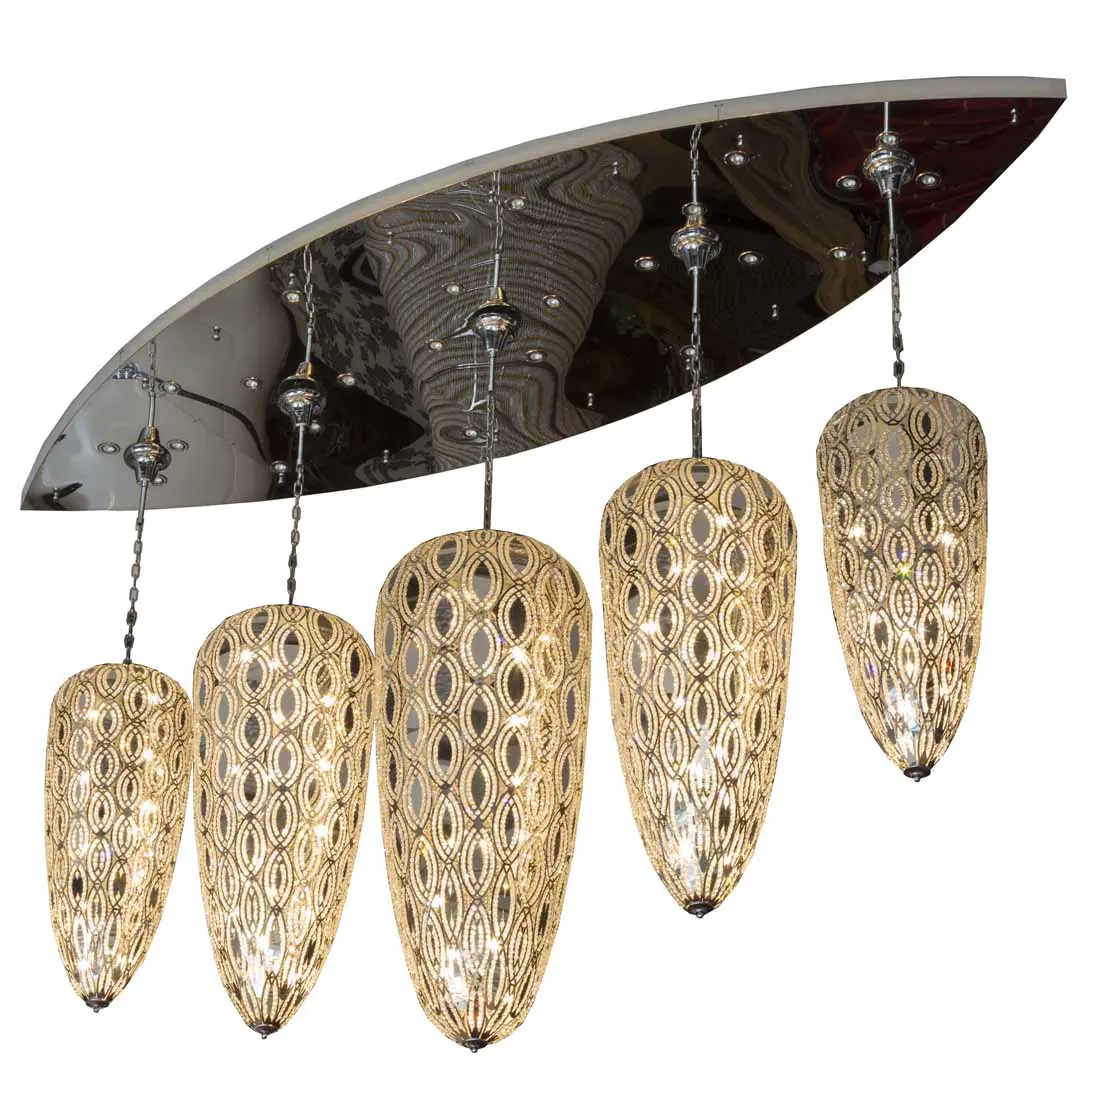 Customized Crystal Chandelier (MX282-ST-chili)